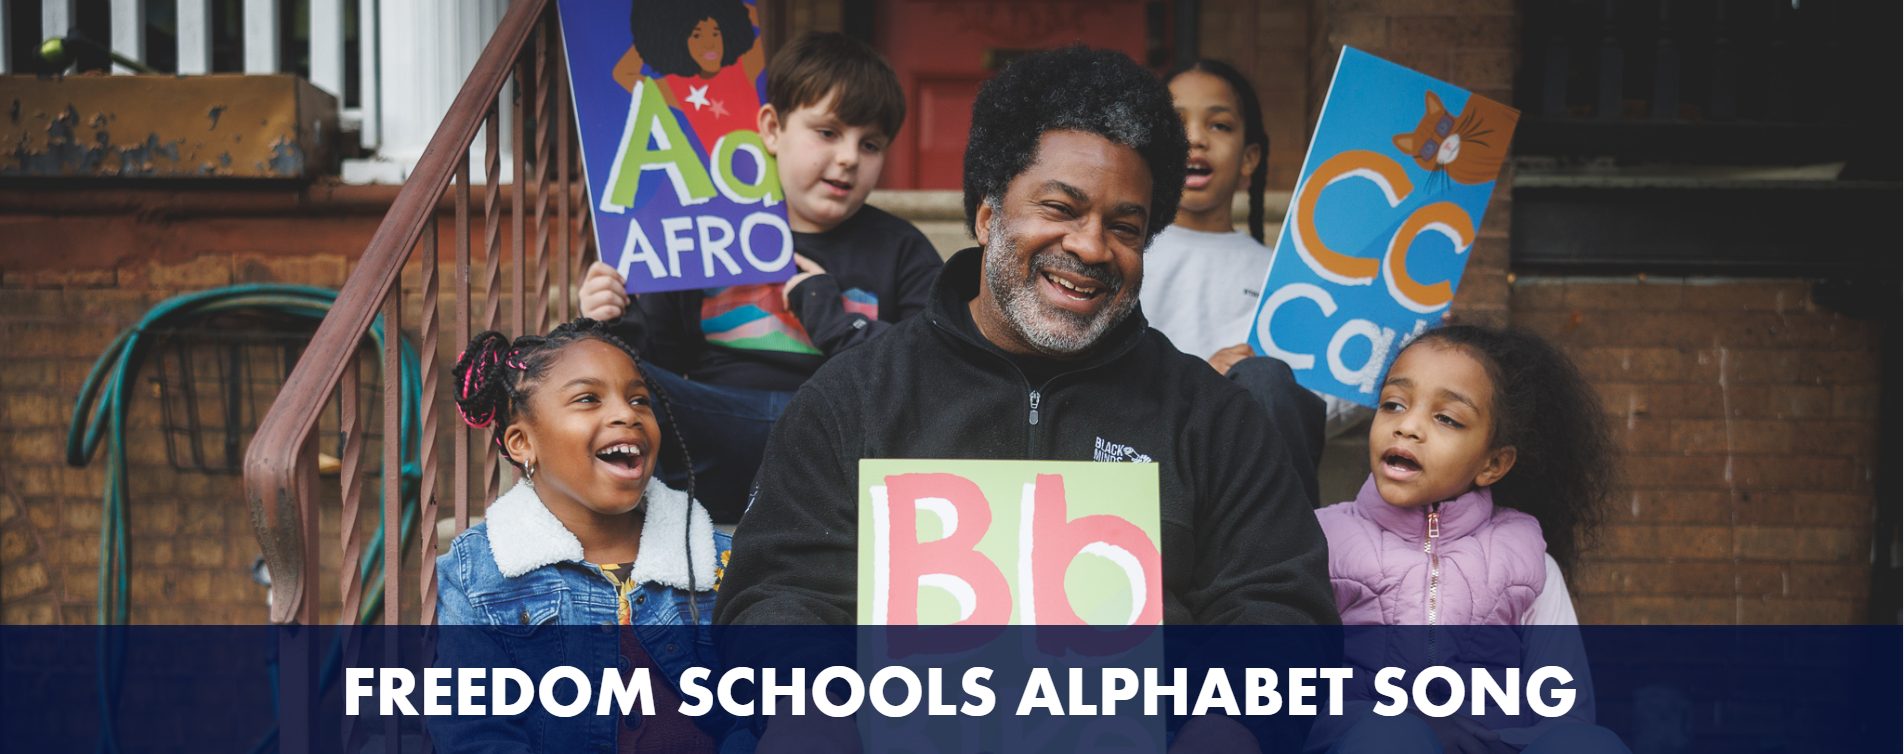 Freedom Schools Alphabet Song: Right2ReadPhilly